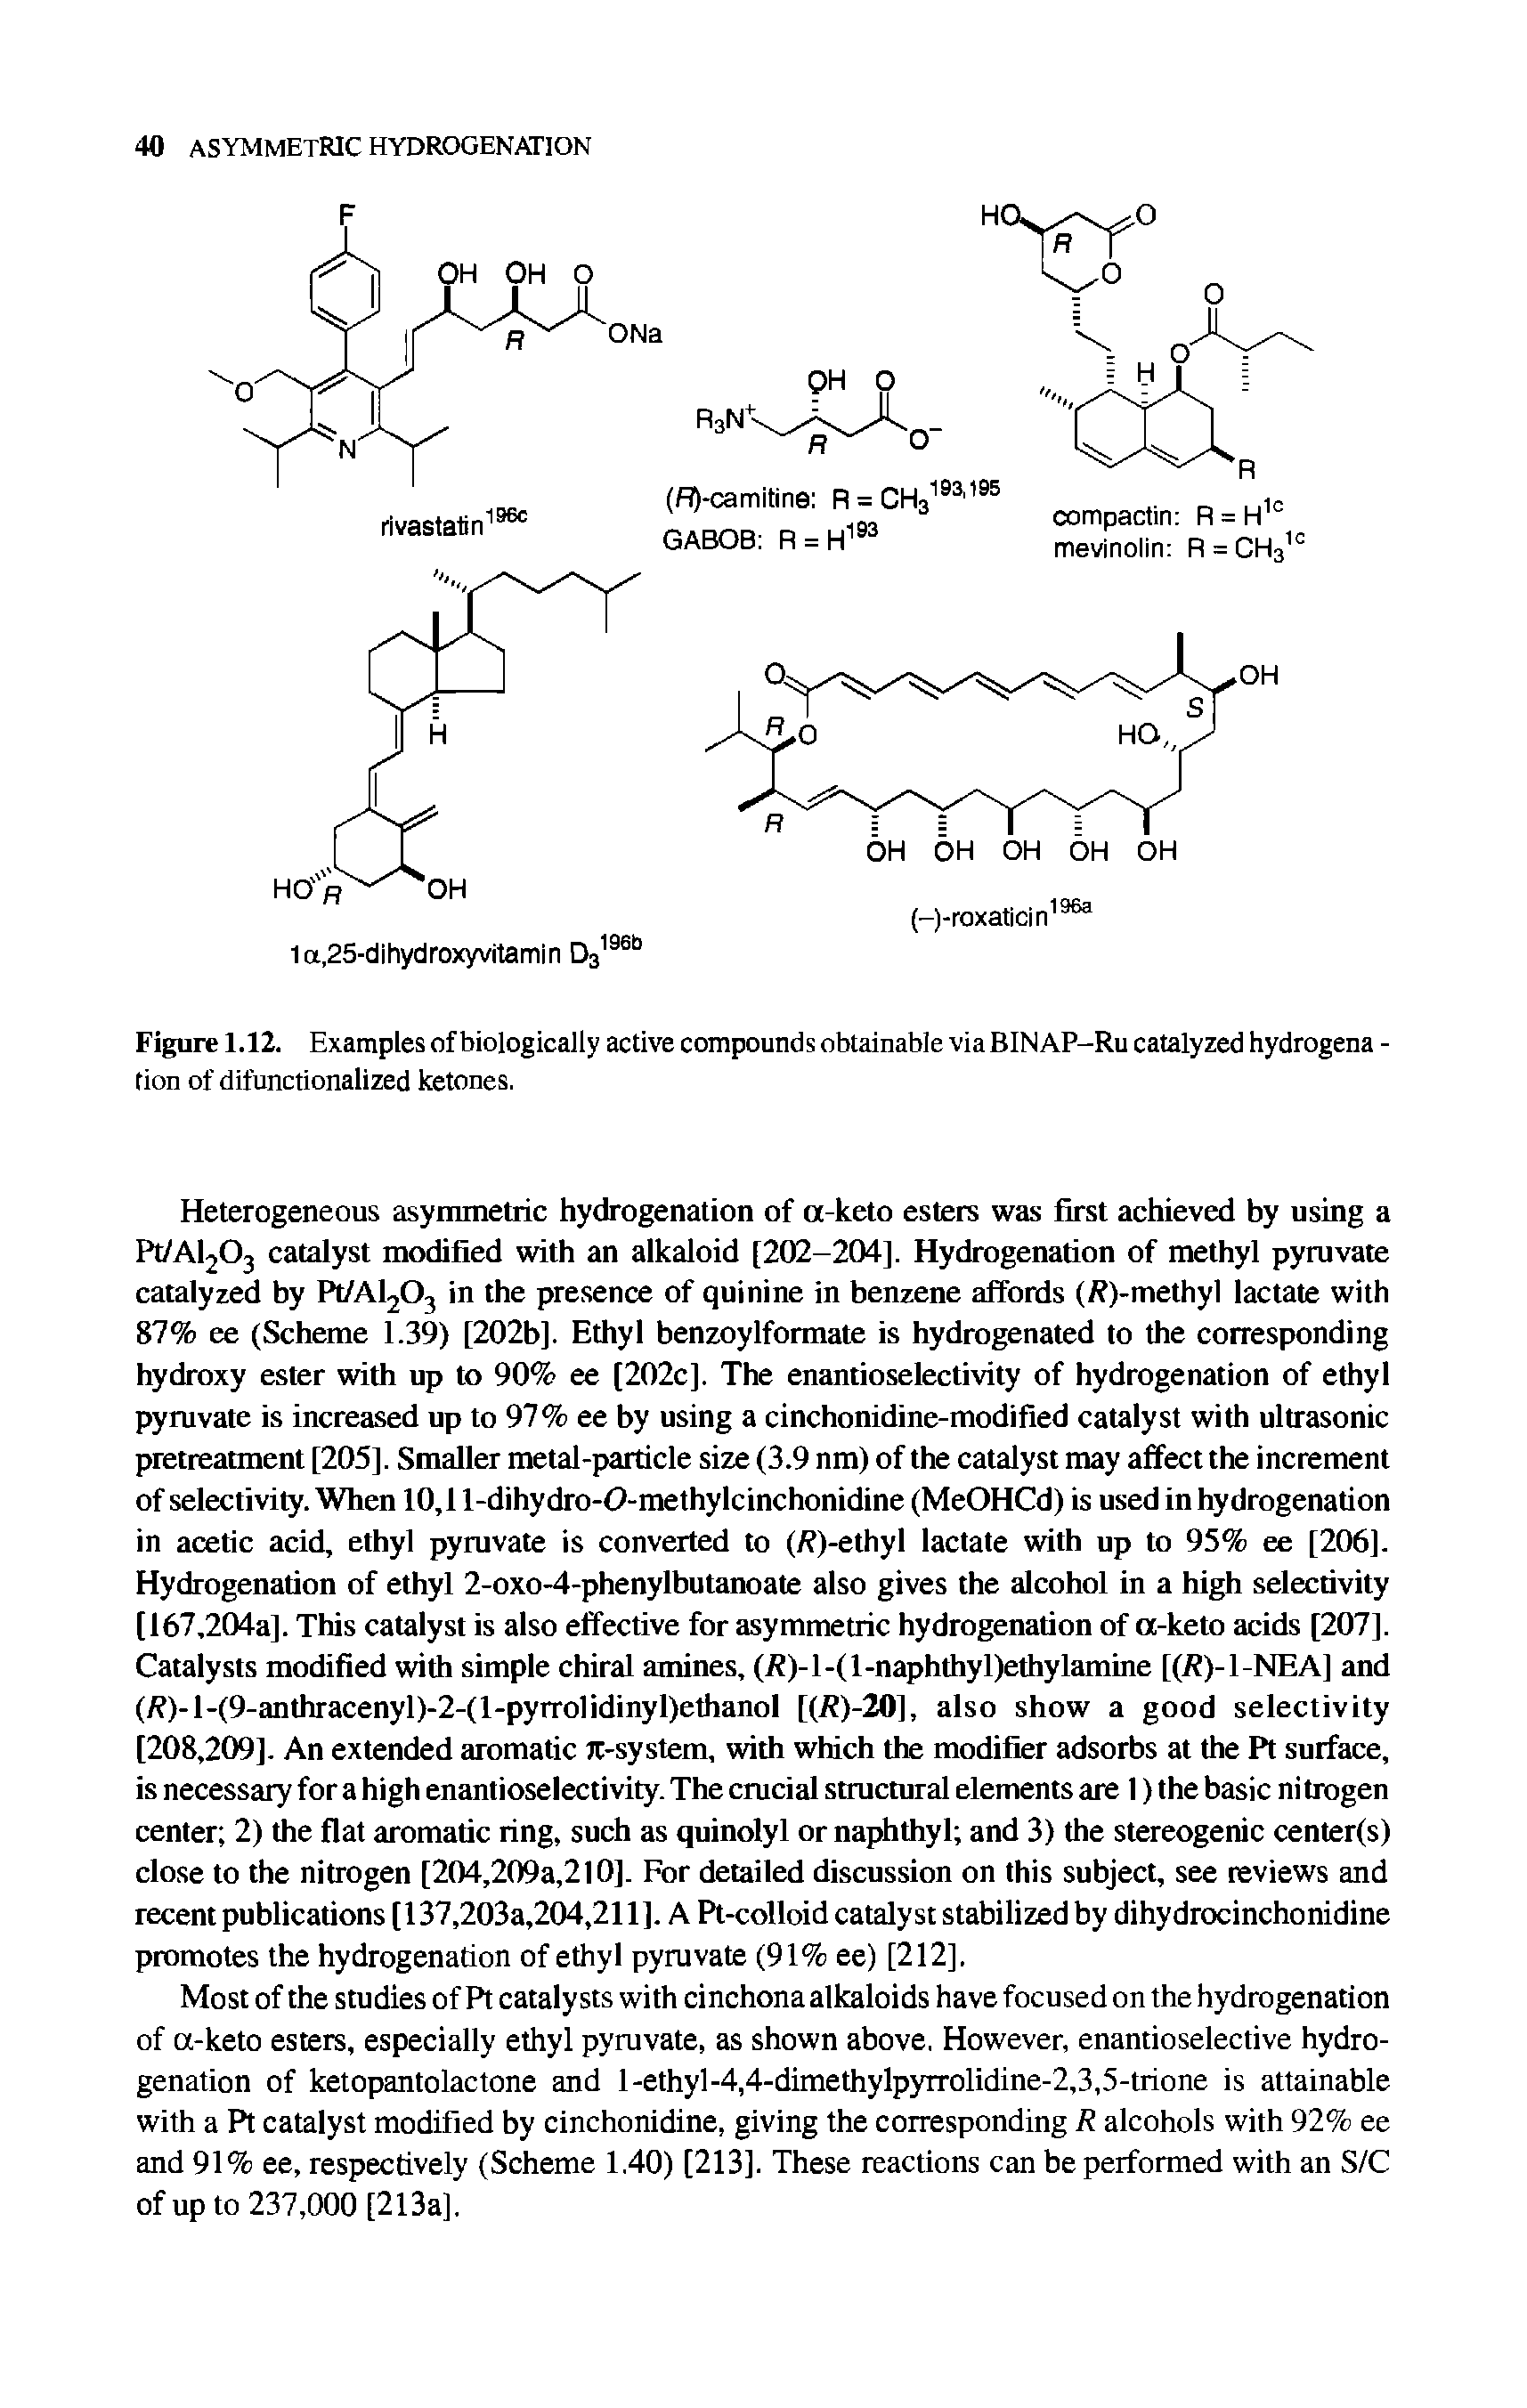 Figure 1.12. Examples of biologically active compounds obtainable via BINAP-Ru catalyzed hydrogena -tion of difunctionalized ketones.